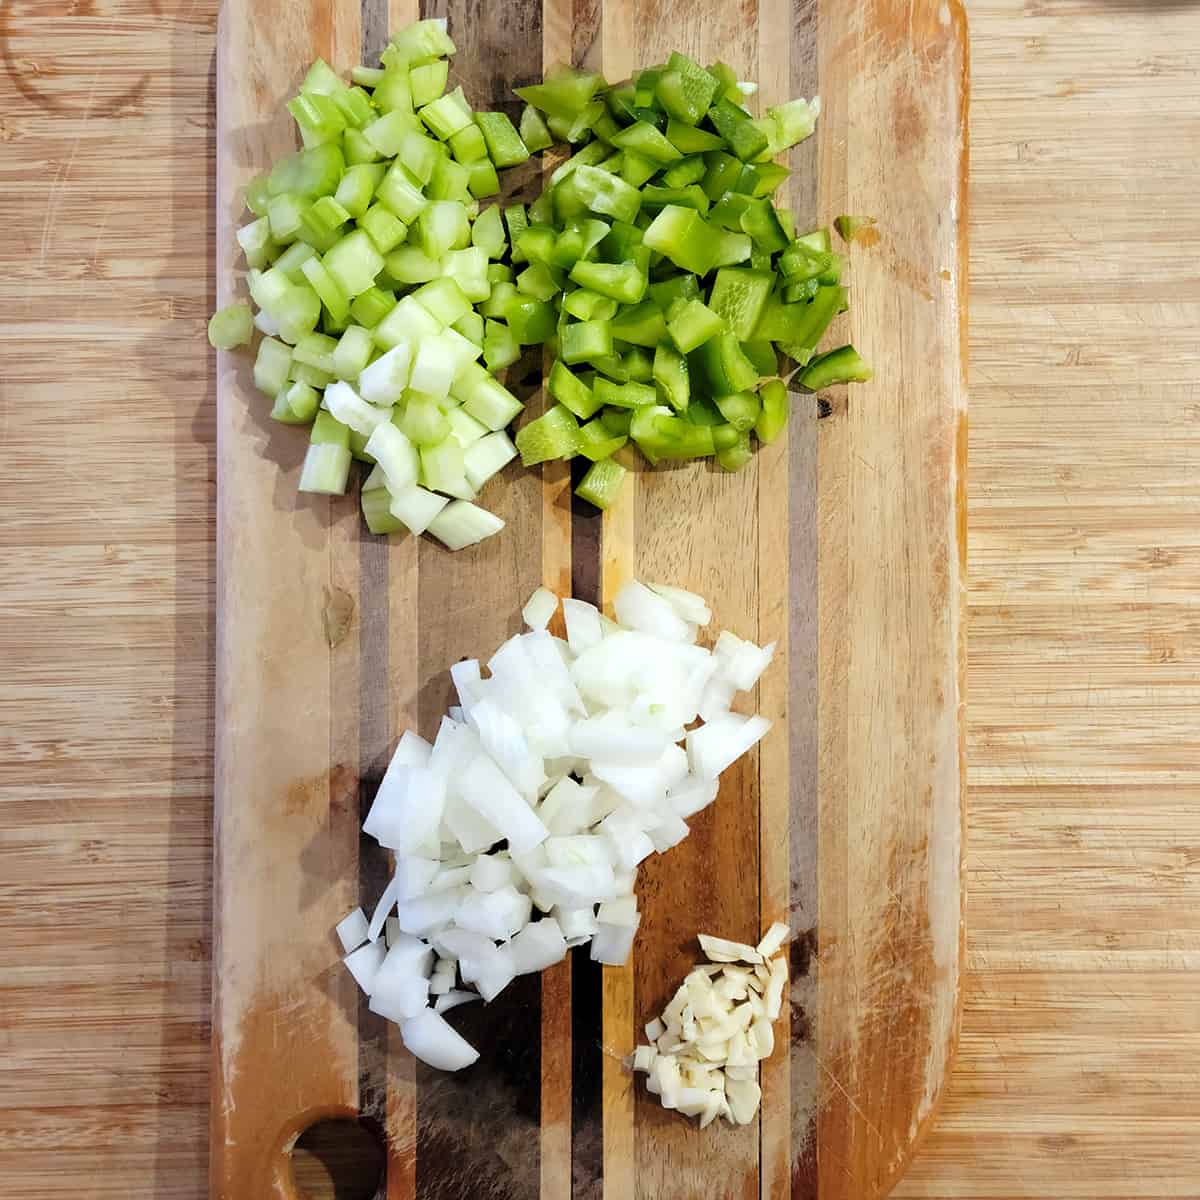 Chopped onion, celery, bell pepper, and garlic on a wooden board.